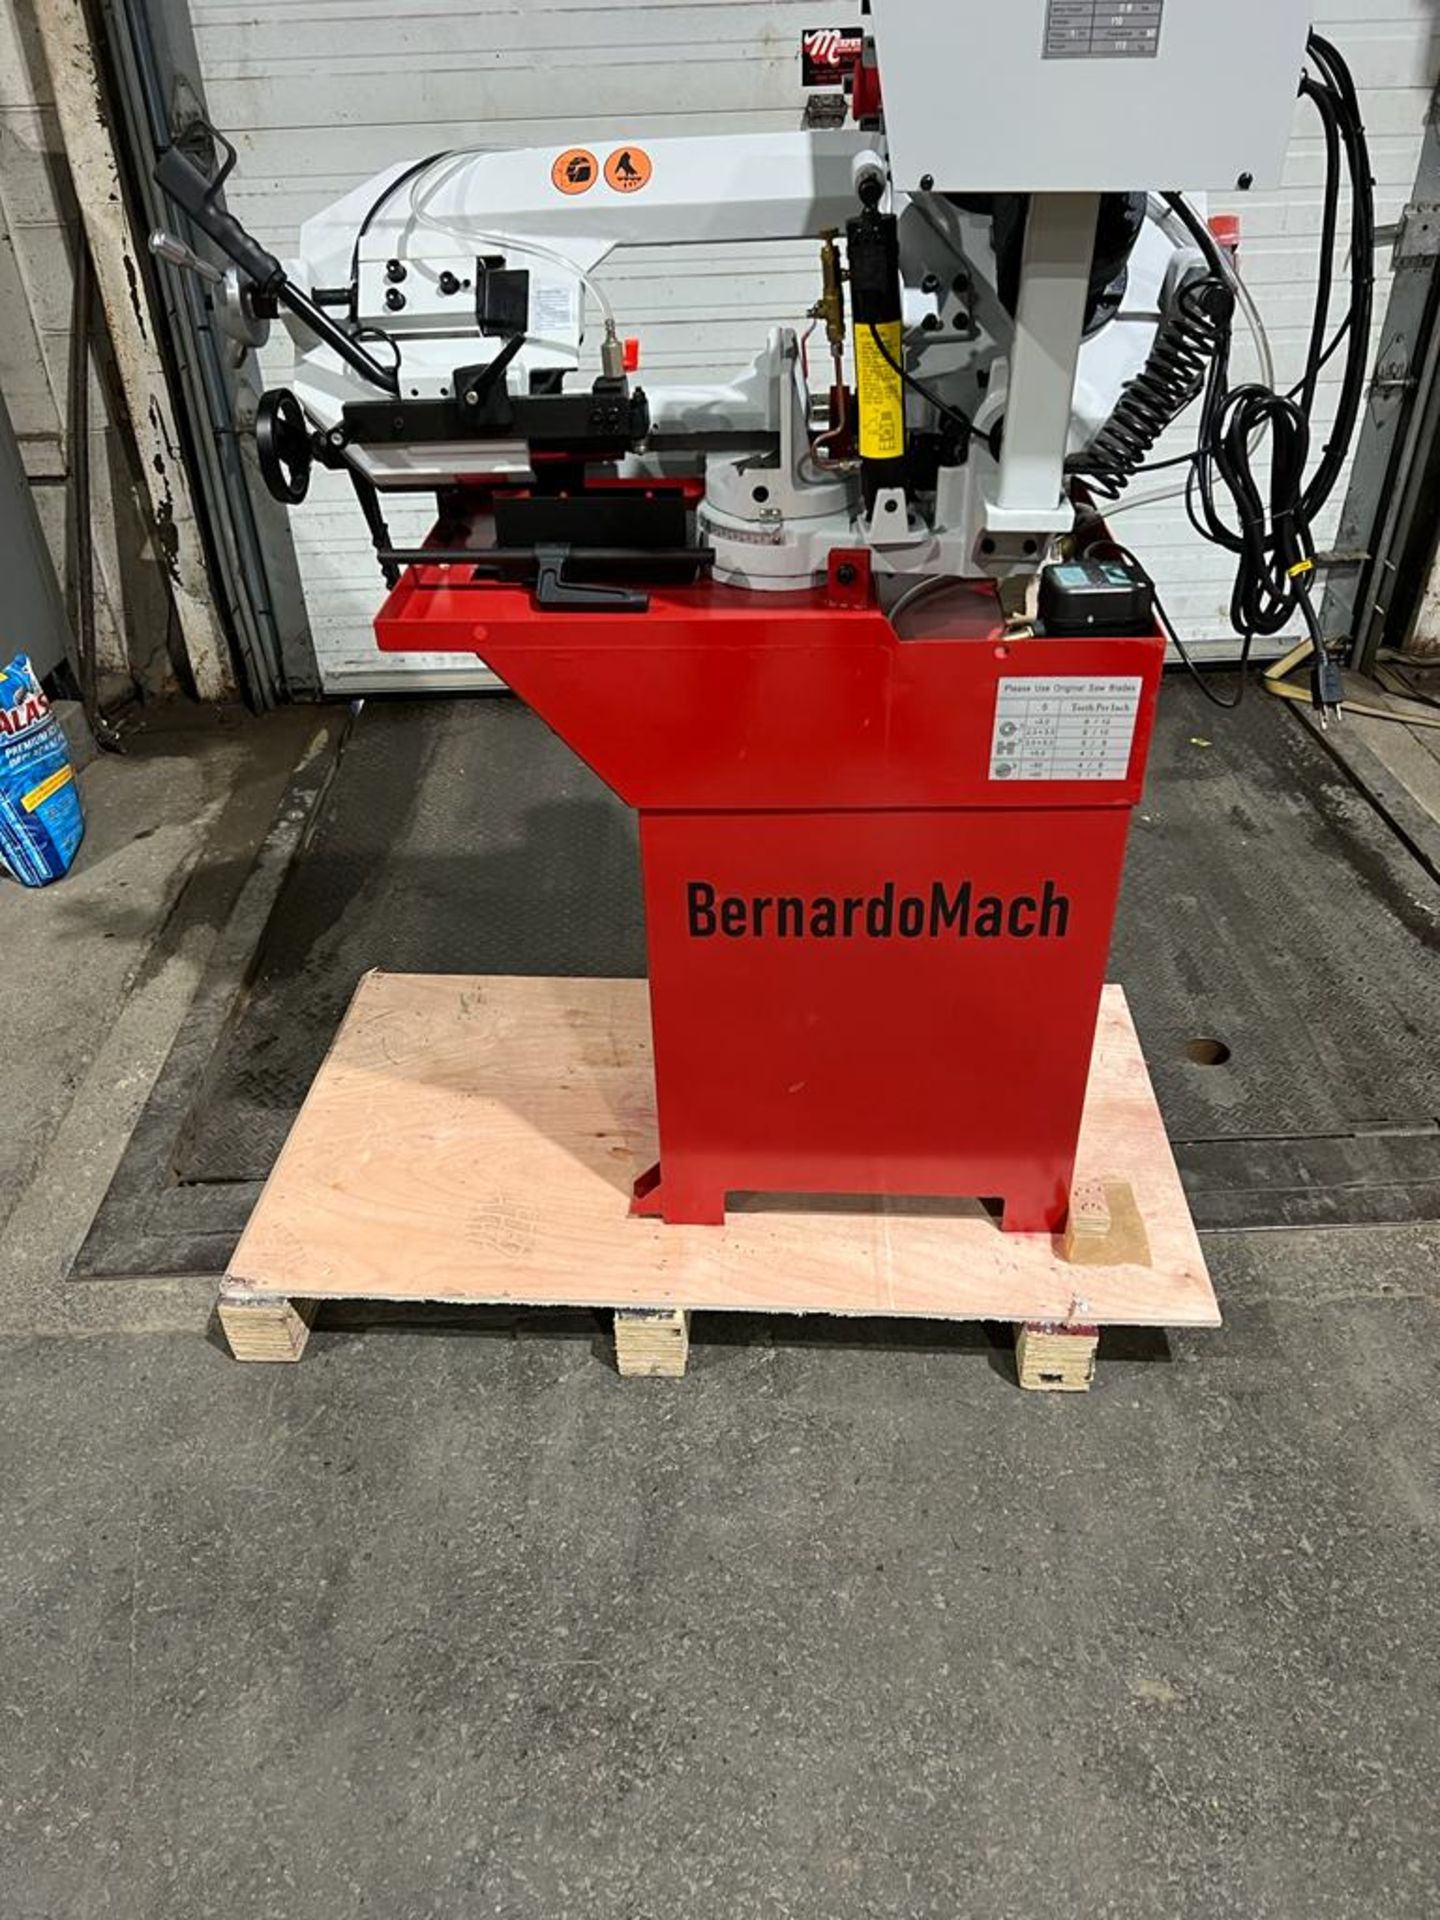 BernardoMach Horizontal Band Saw - GEAR DRIVEN MOTOR with POWER HEAD with Automatic & Manual cut -